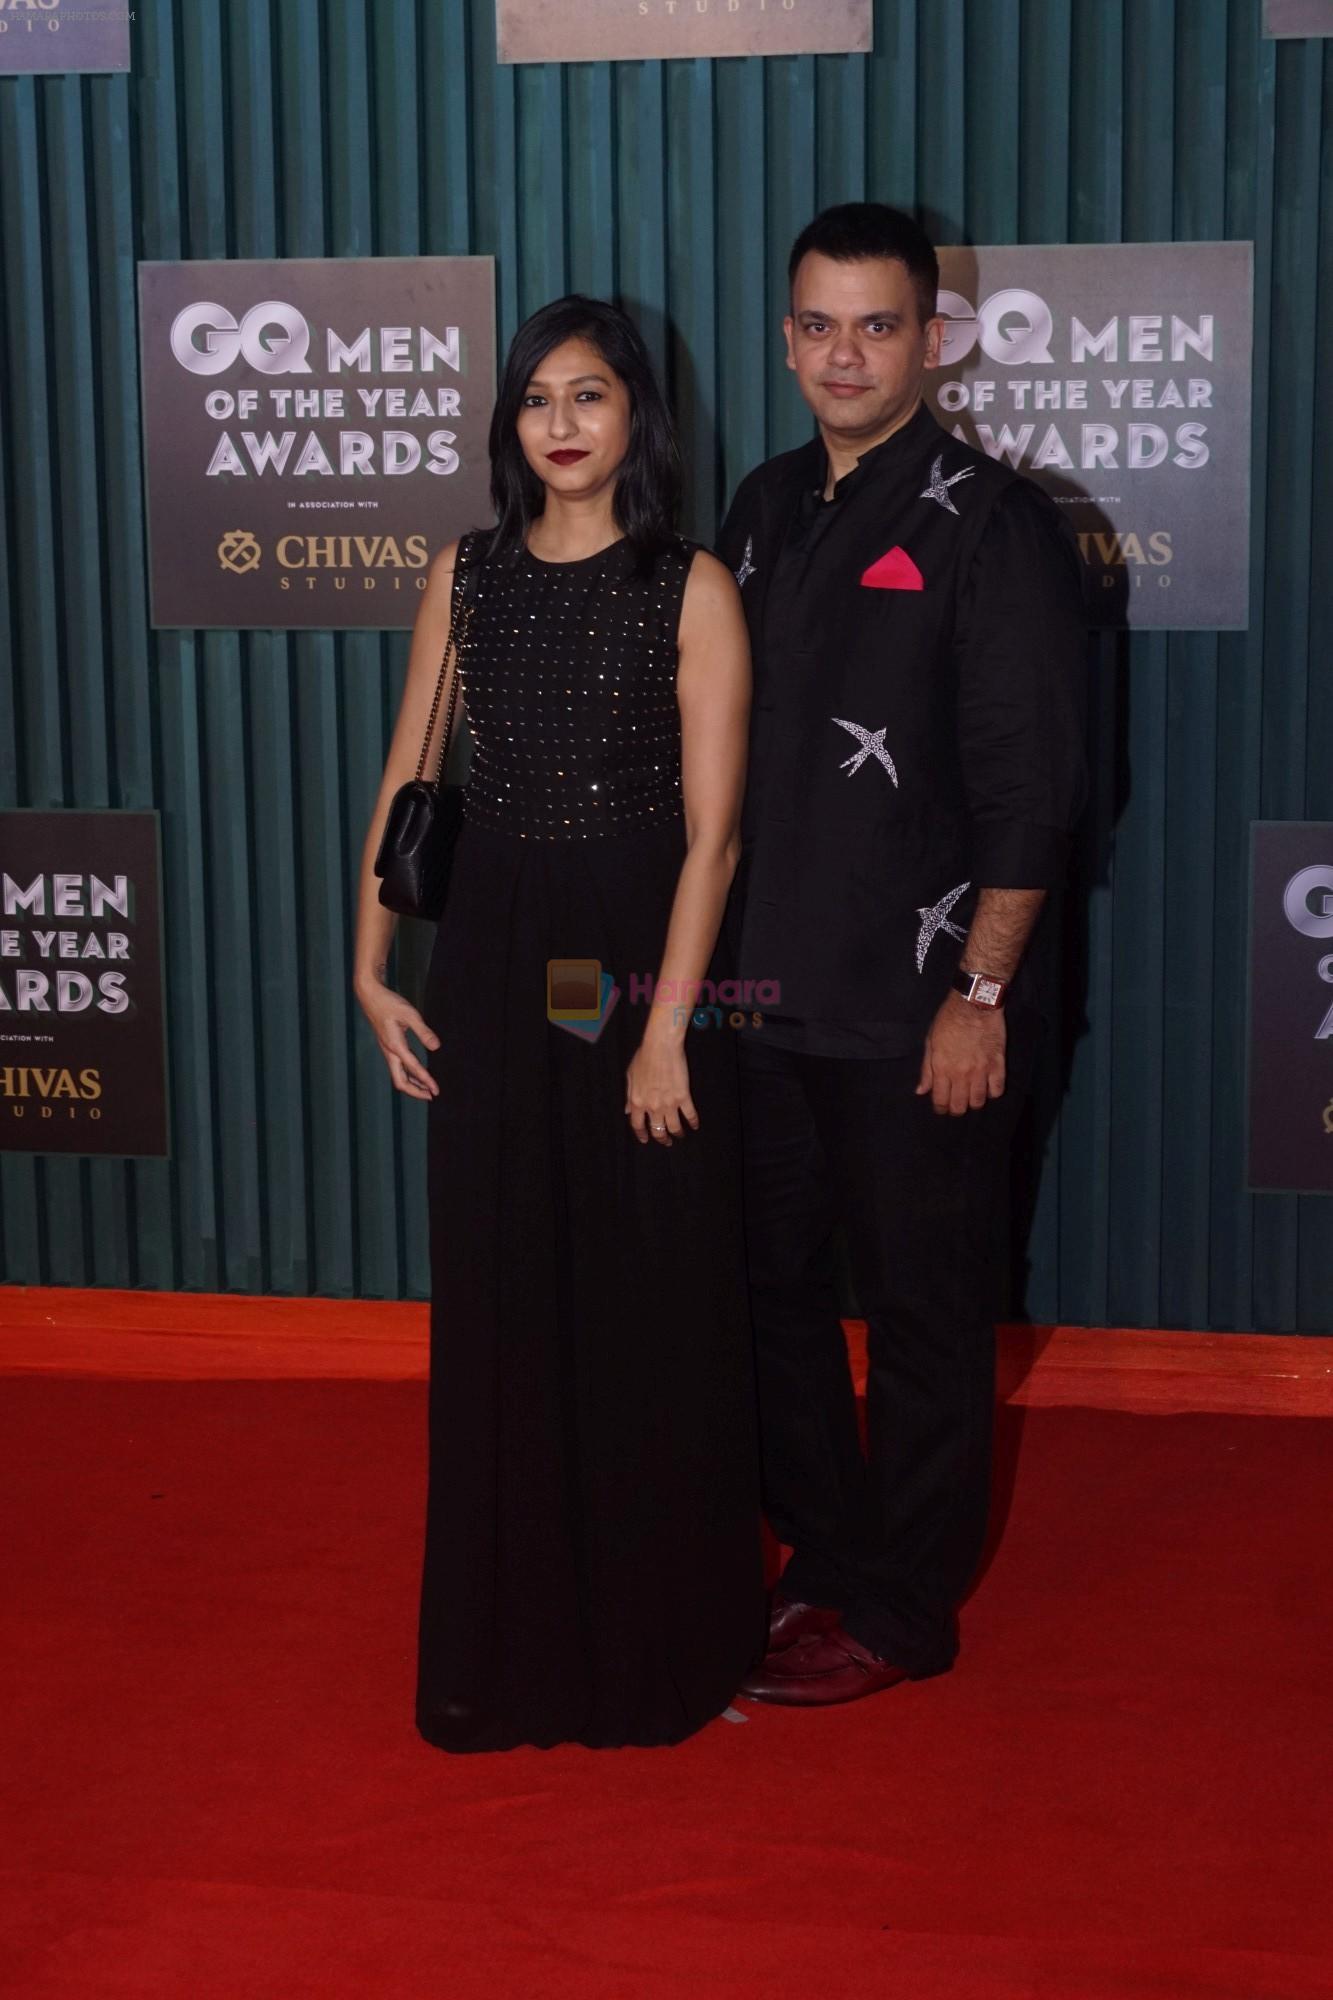 Nachiket Barve at GQ Men of the Year Awards 2018 on 27th Sept 2018